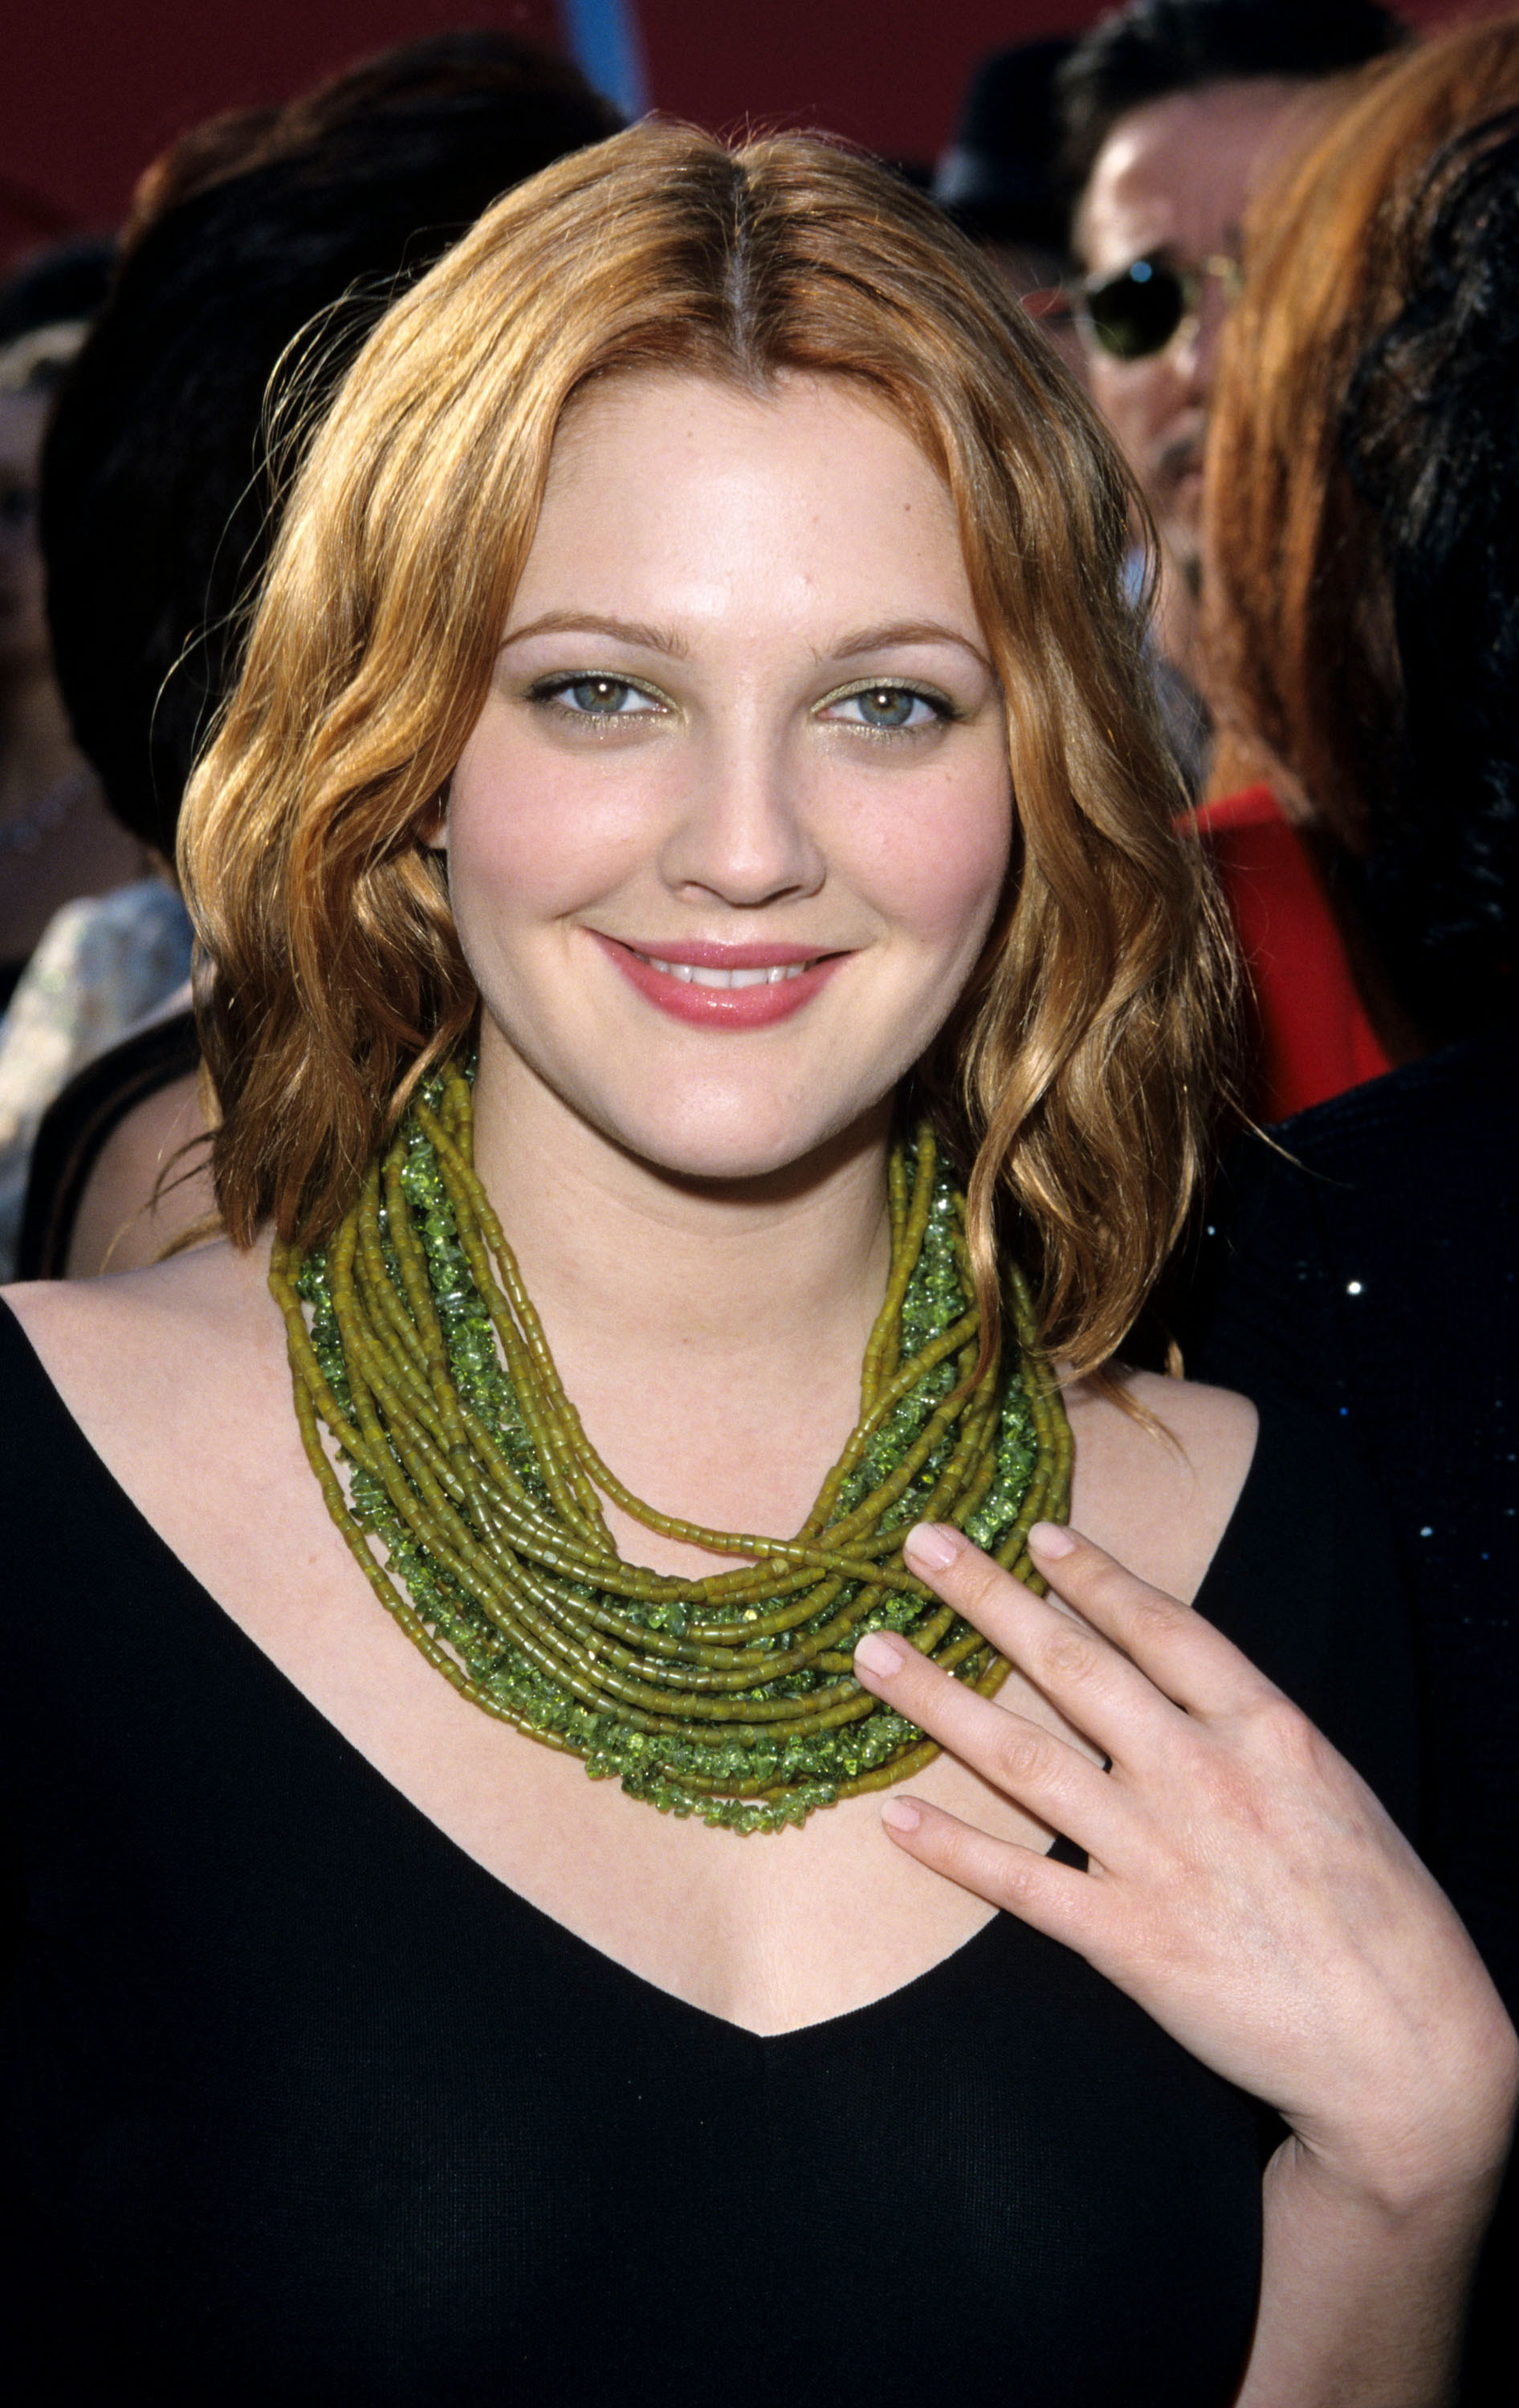 Barrymore at an awards show in 2000